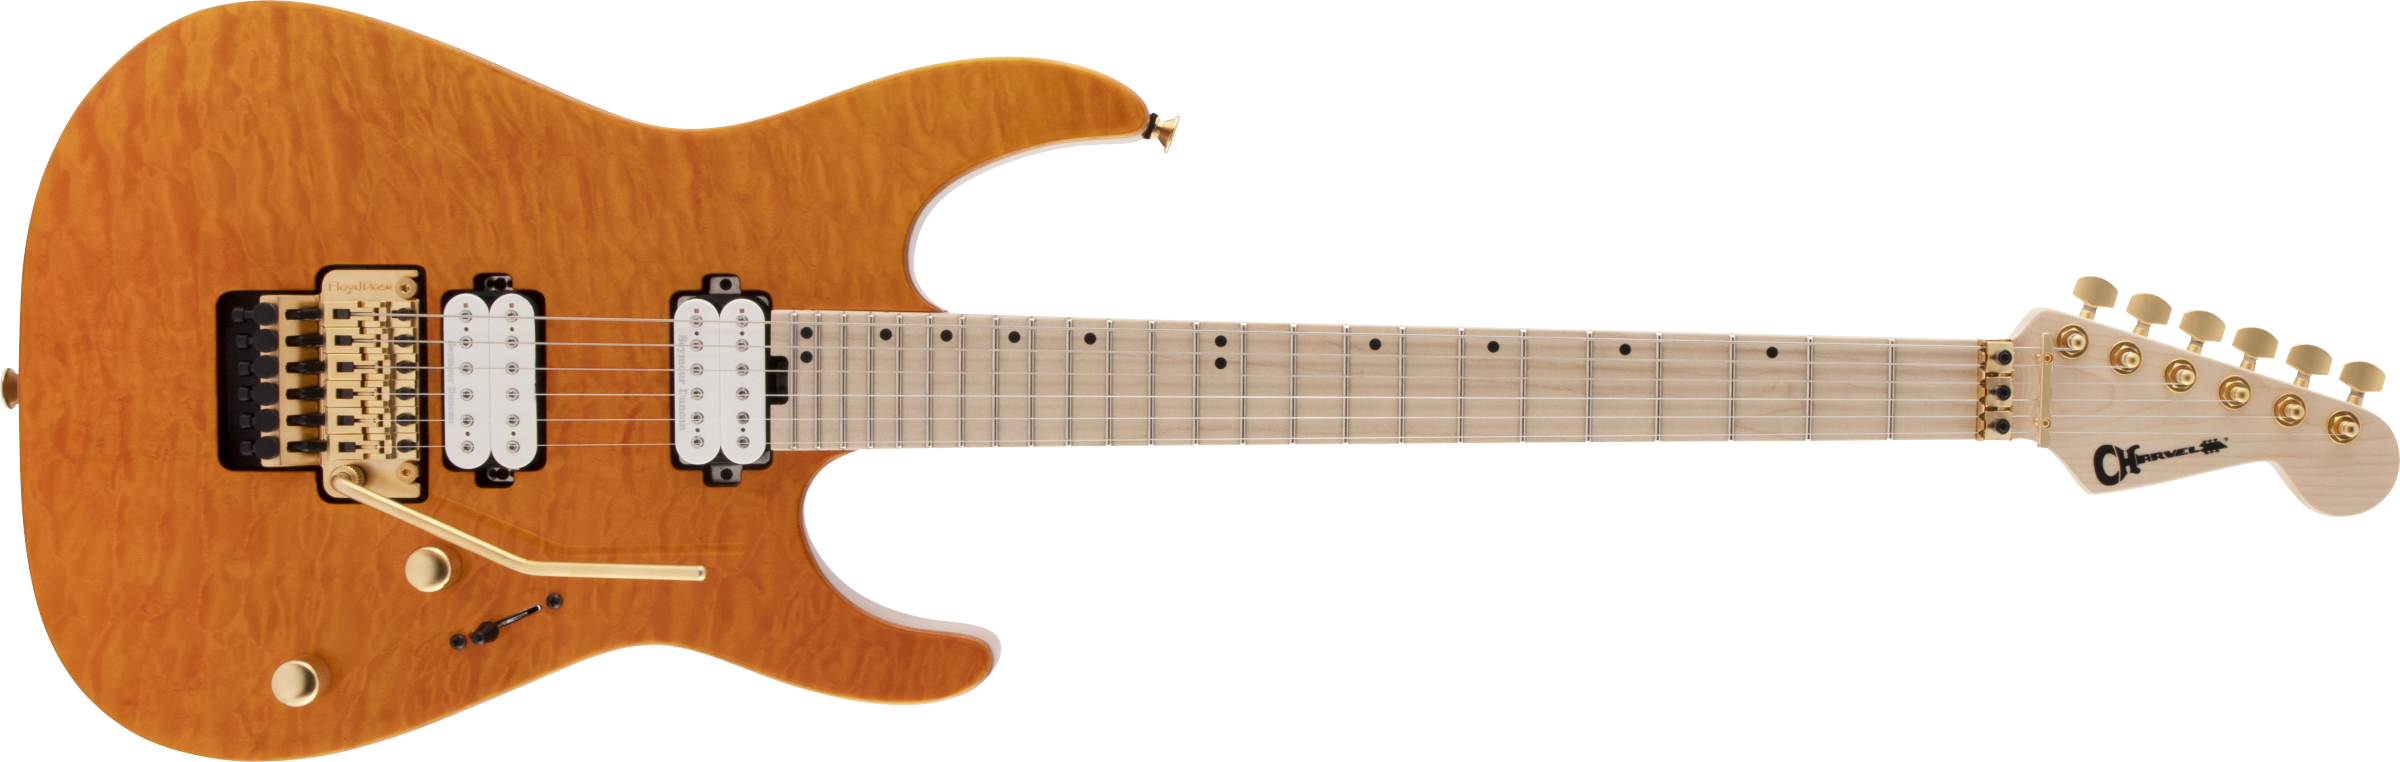 Charvel Pro-Mod DK24 HH FR M Mahogany with Quilt Maple Maple 